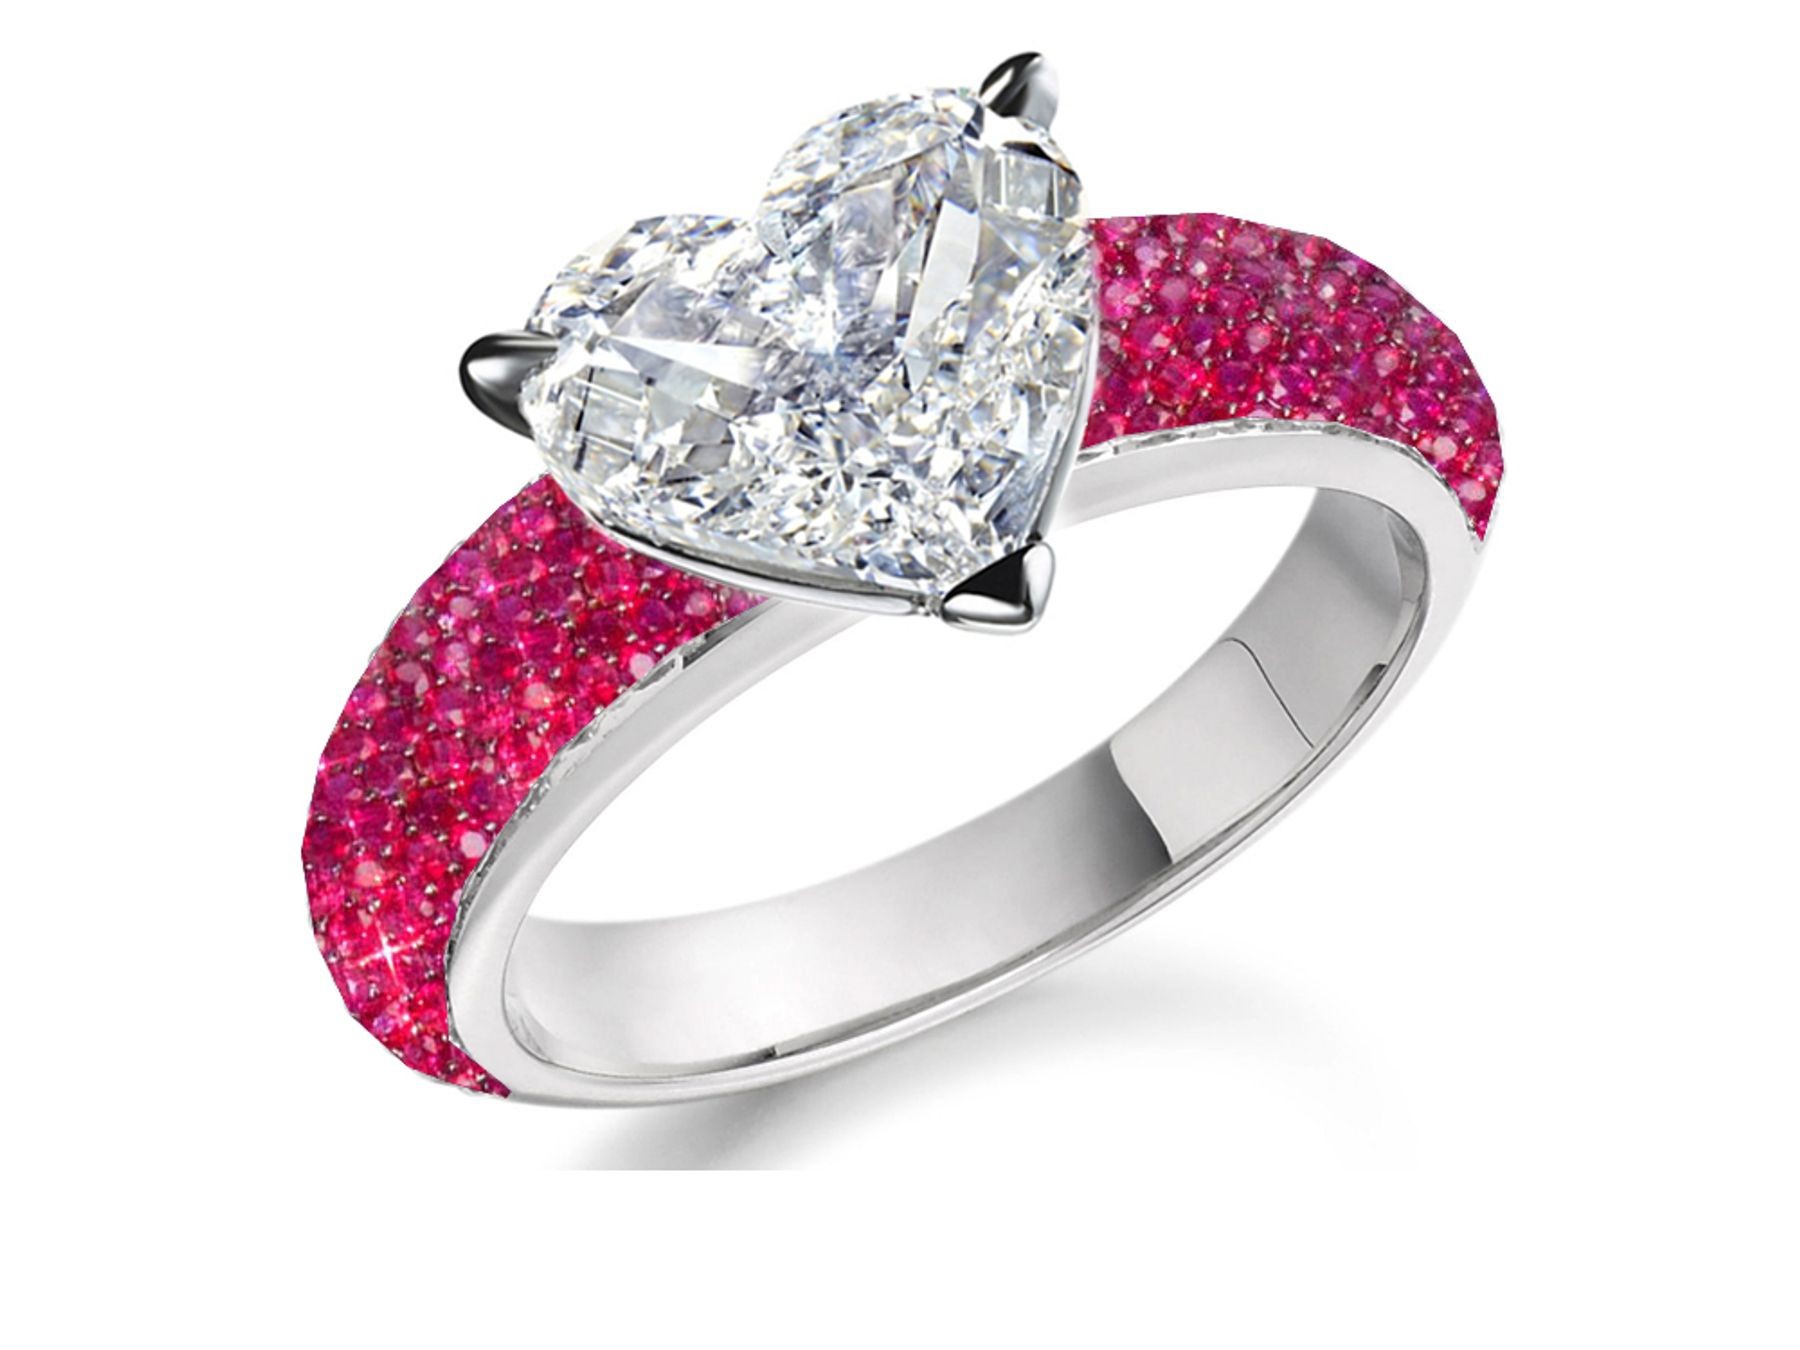 Handcrafted Delicate Heart Diamond & Micro Pave Halo Brilliant Cut Round Rubies Ring